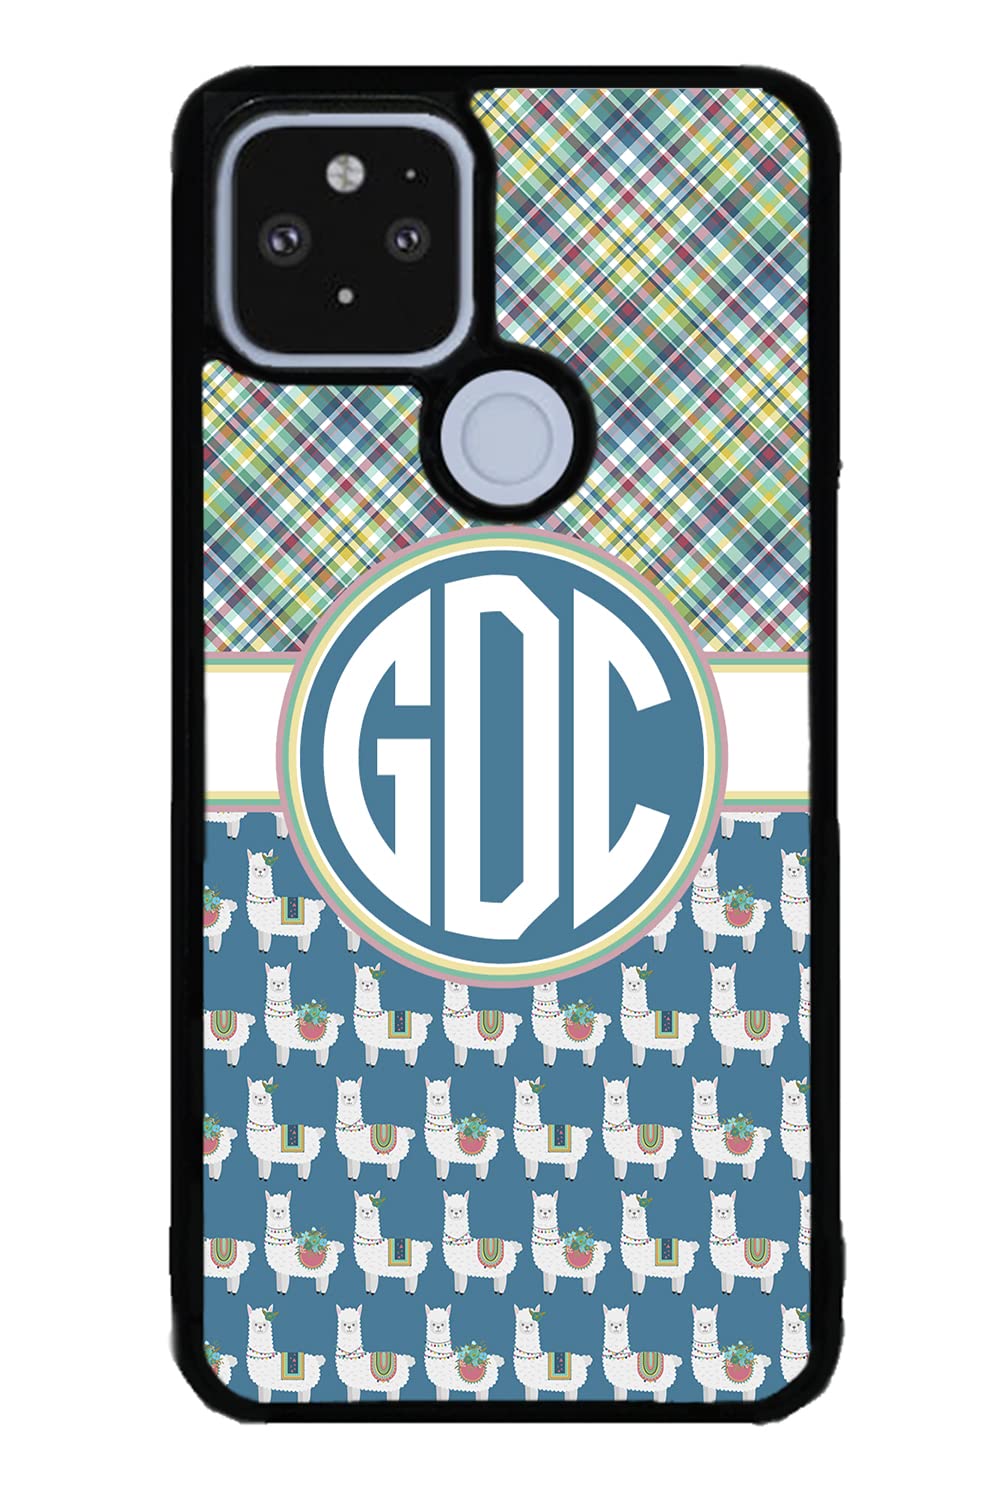 Green Blue and White Plaid Llama Monogram Black Rubber Phone Case Compatible With Google Pixel 8 Pro, 8a, 8, 7a, 7, Pixel 7 Pro, 6a, Pixel 6 Pro, 6, 5, 4a 5G, 4a 4G, 4, 4 XL, 3a, 3a XL, 3